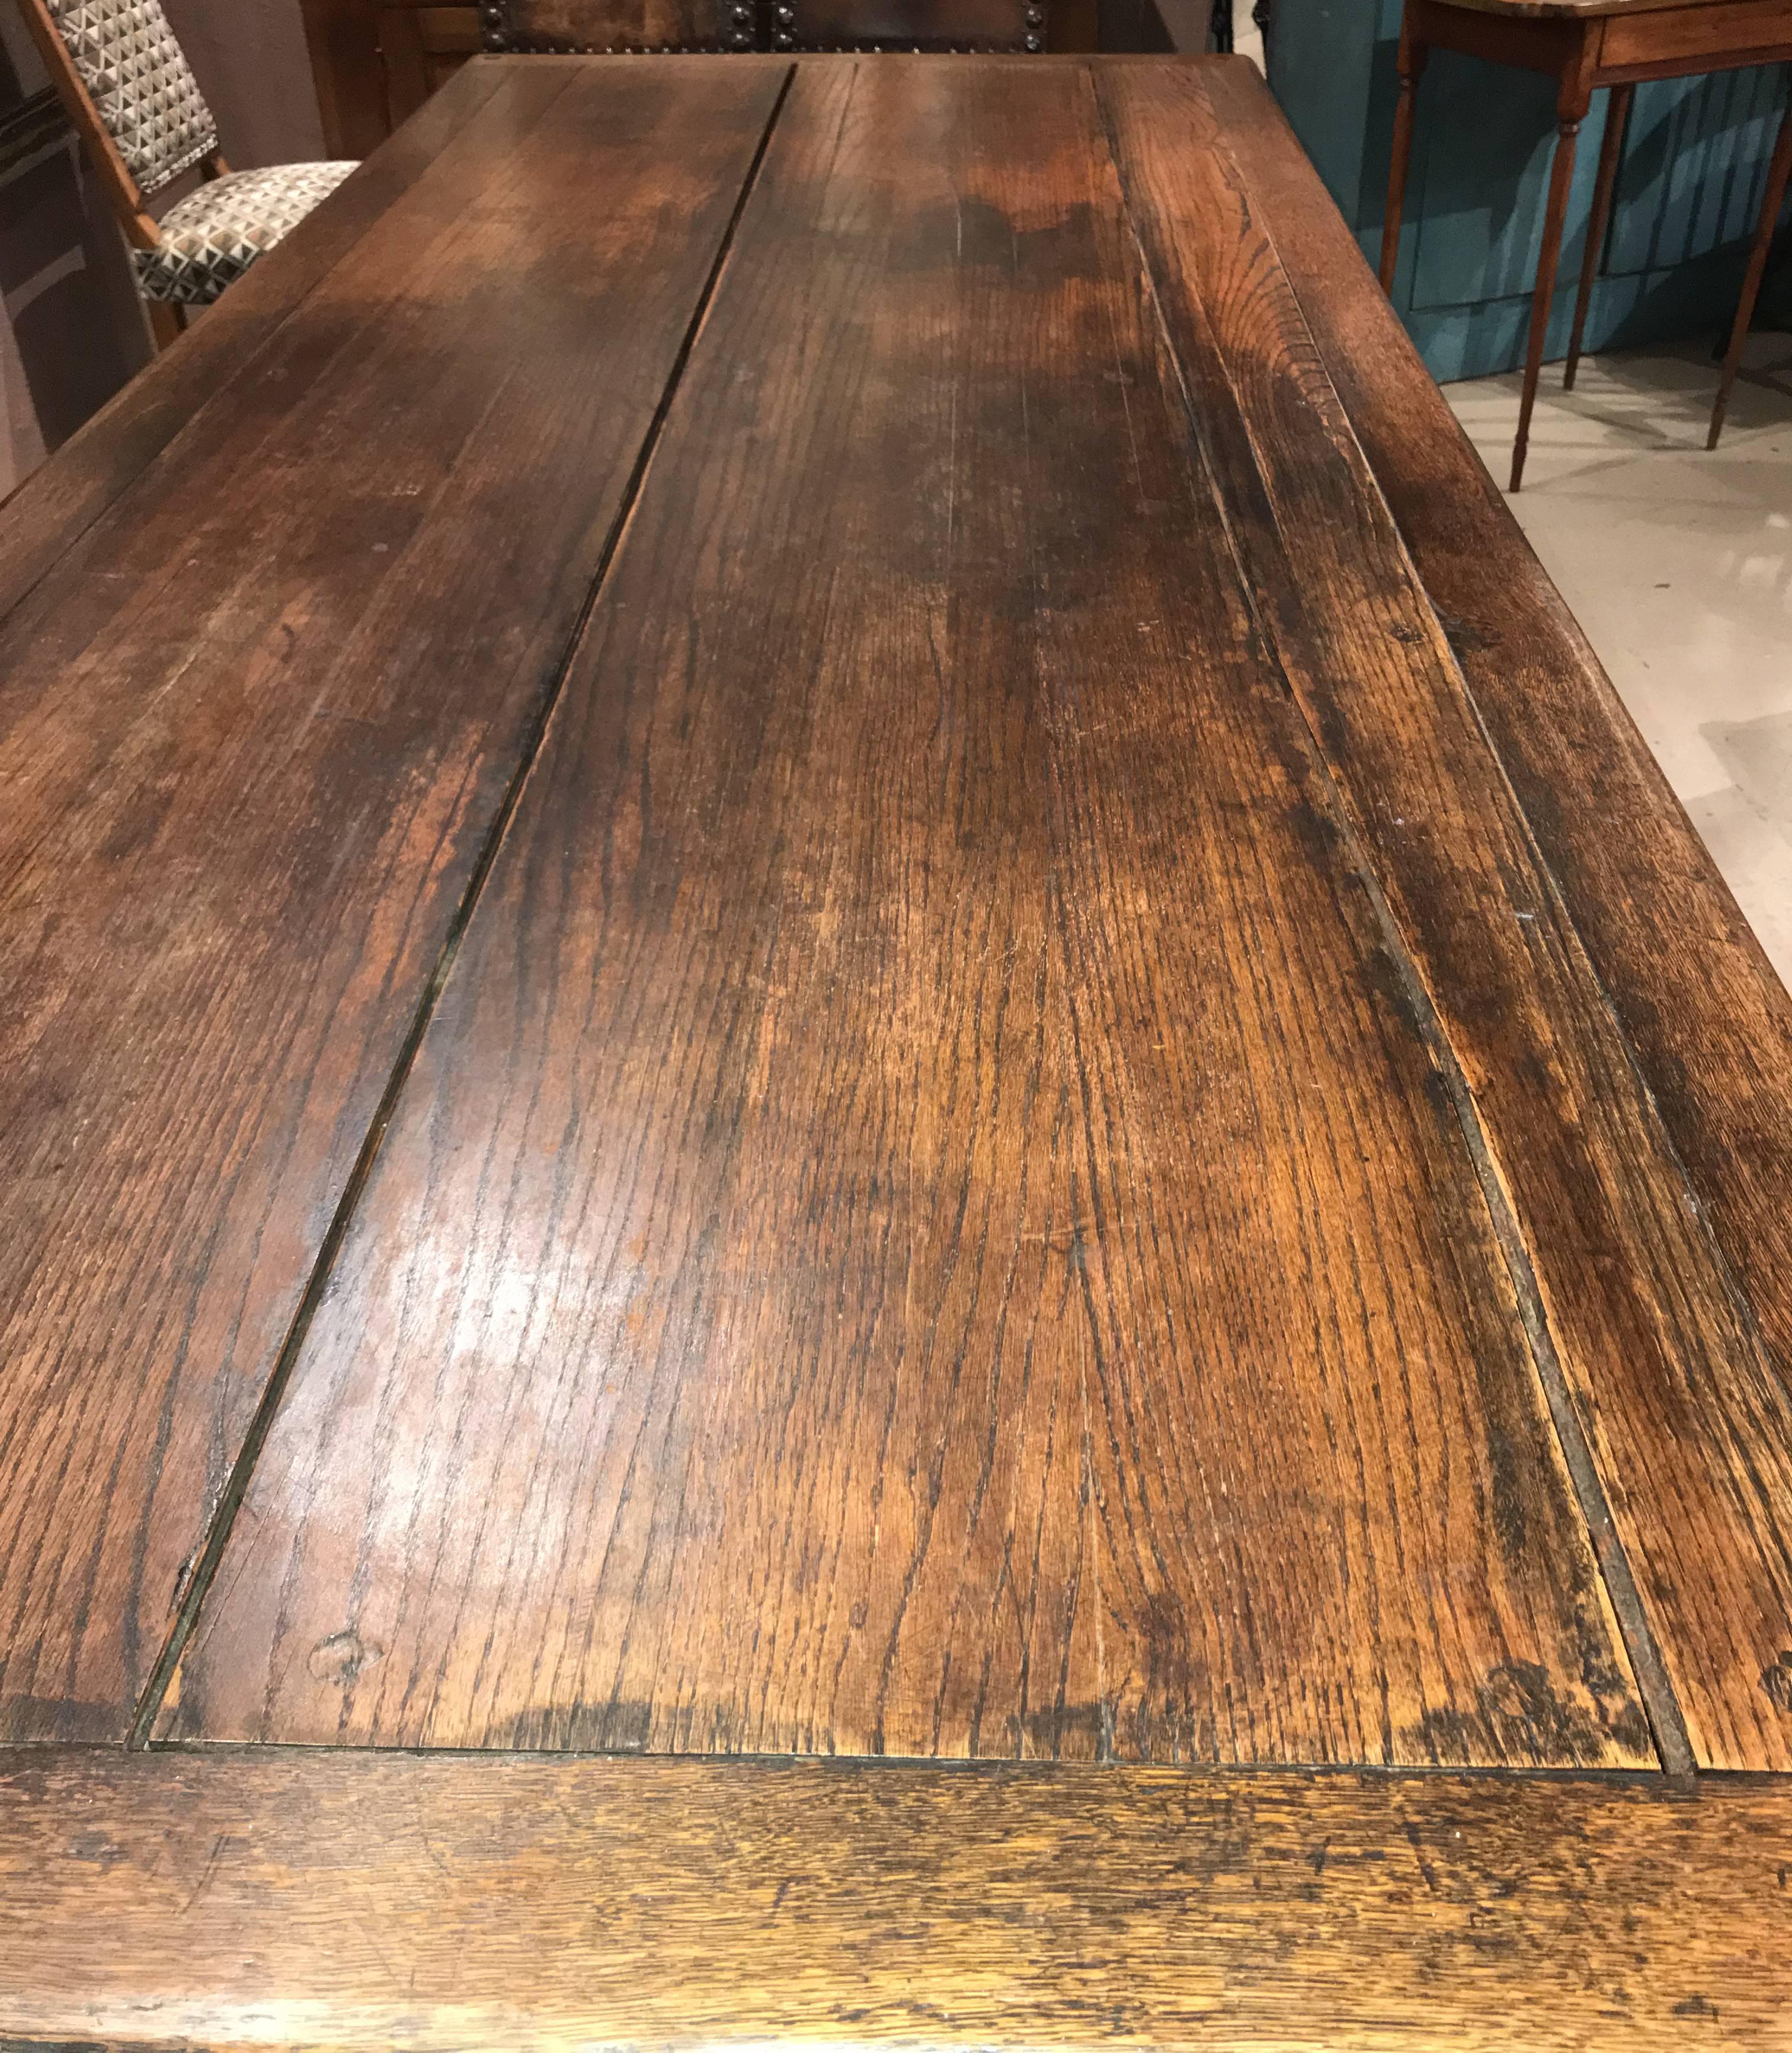 European 19th Century Continental Oak Refectory Table with Turned Leg Base